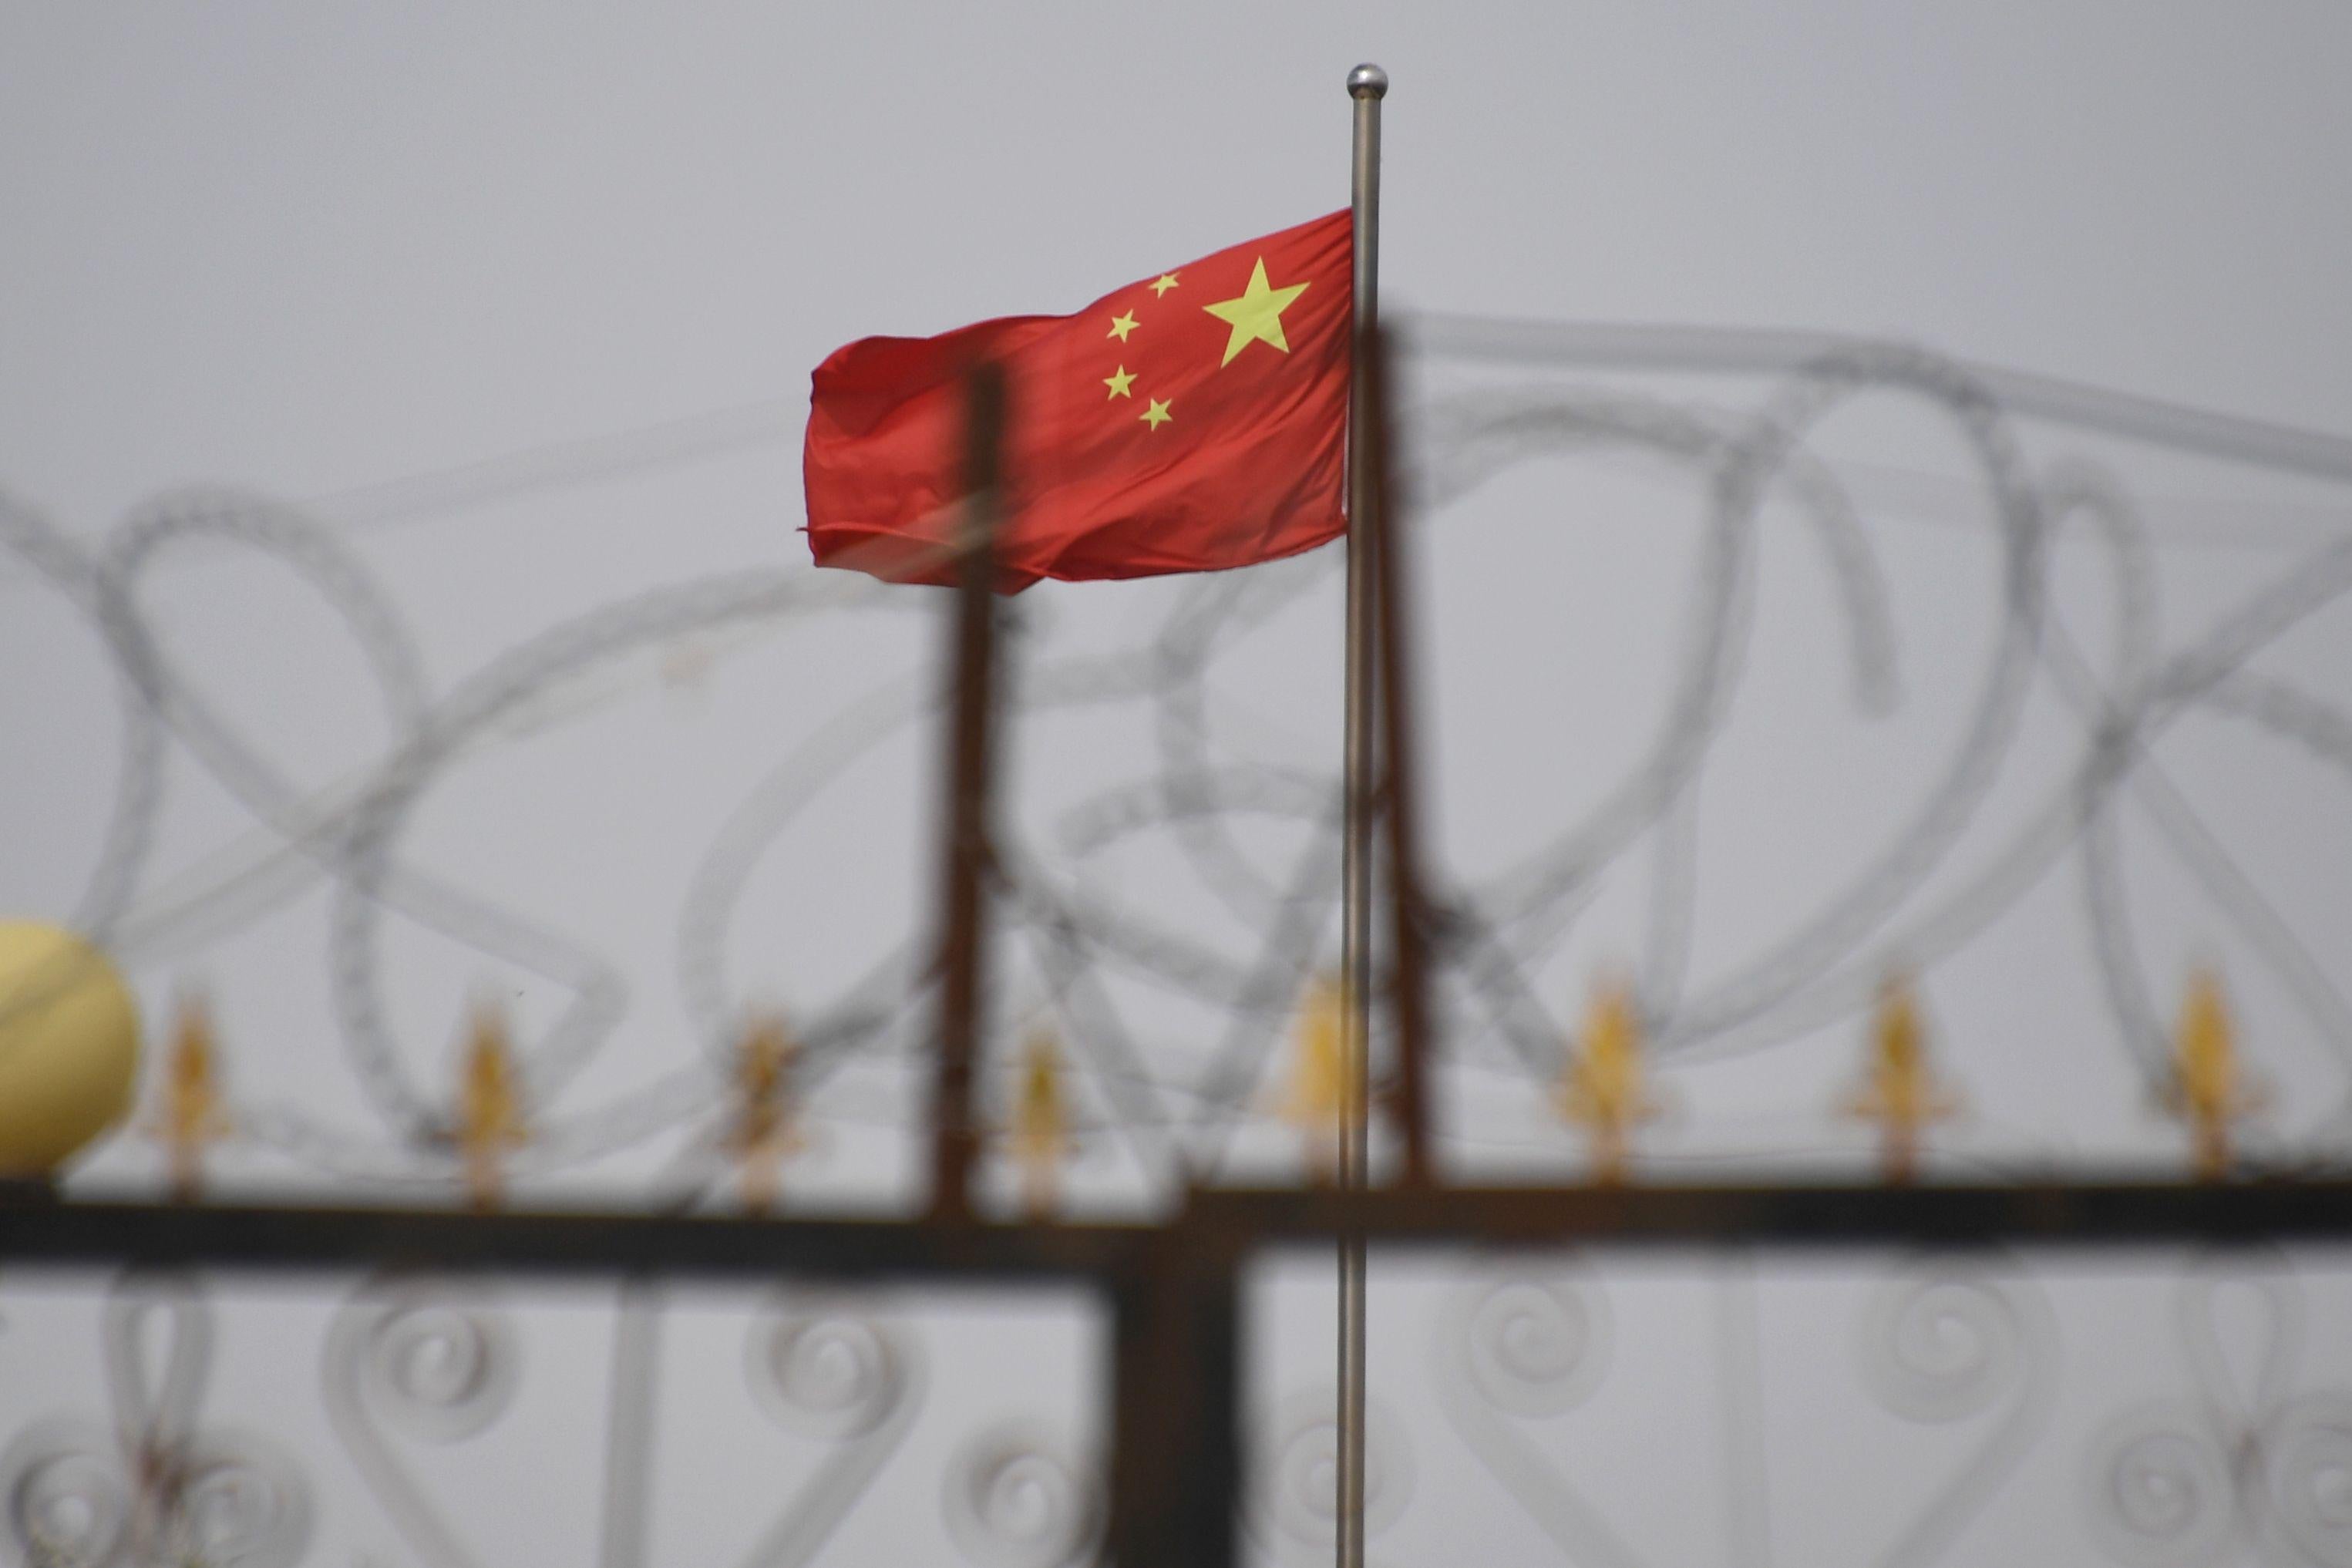 A Chinese flag seen behind razor wire.